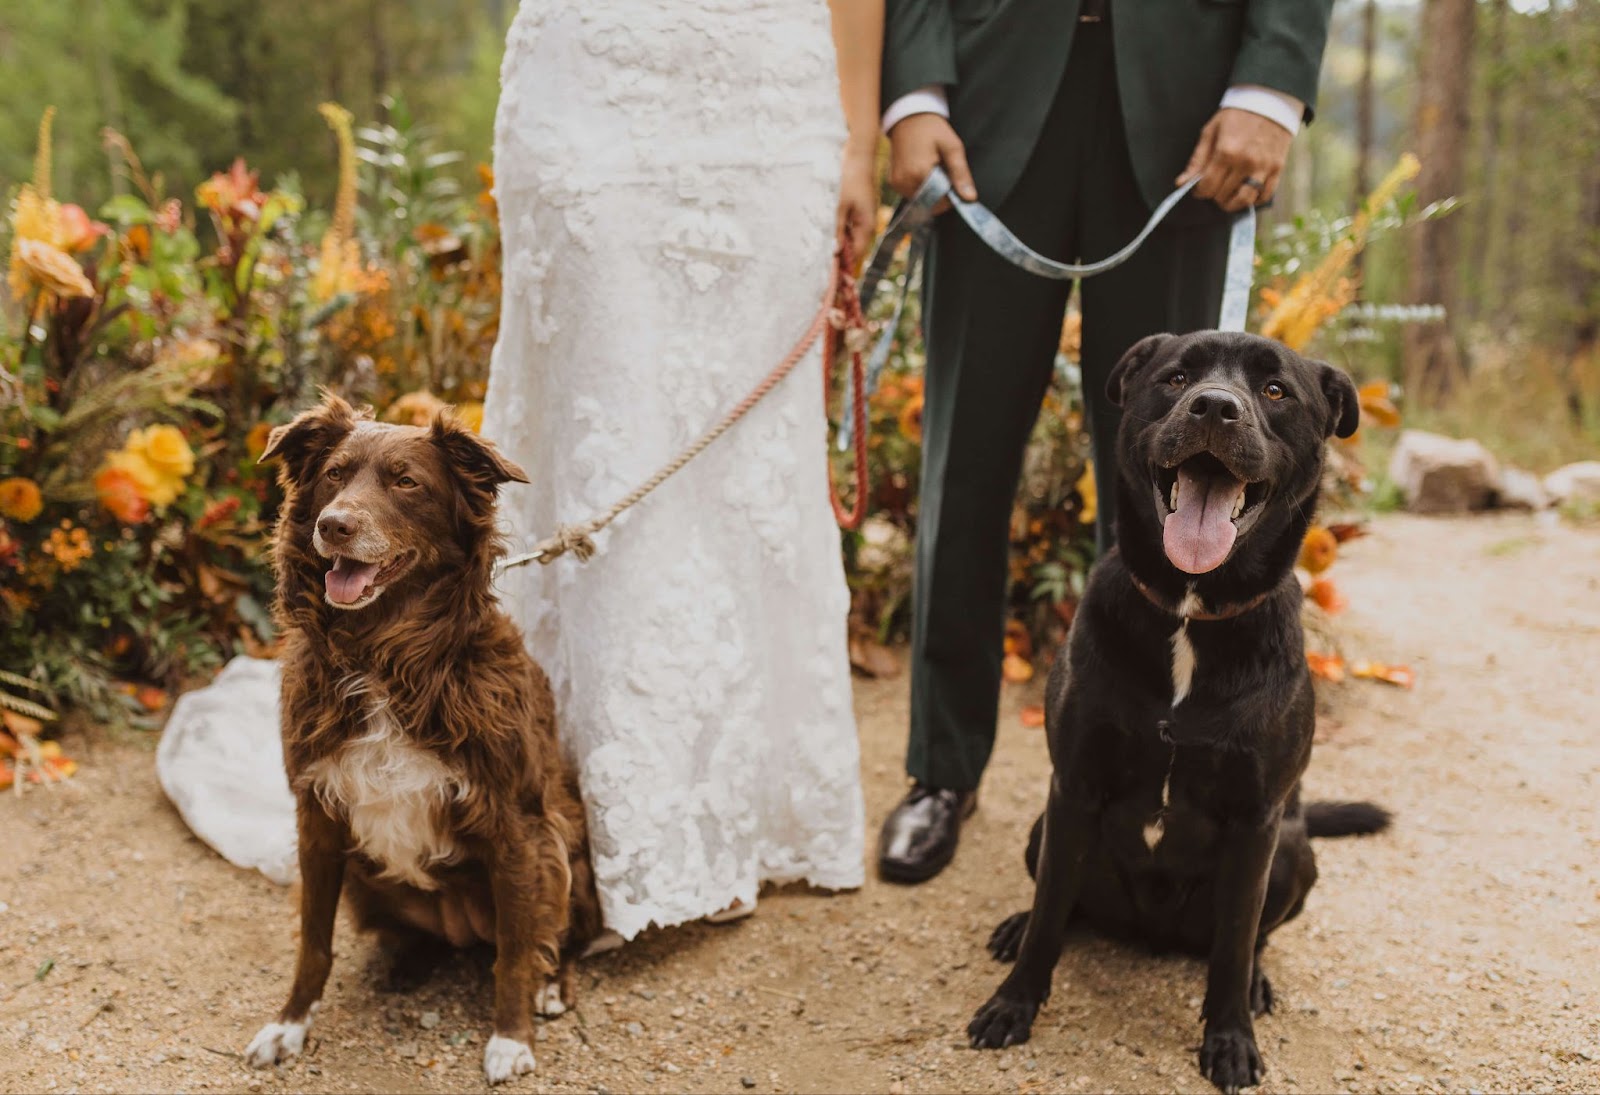 couple with two dogs on their leashes and dogs looking at camera